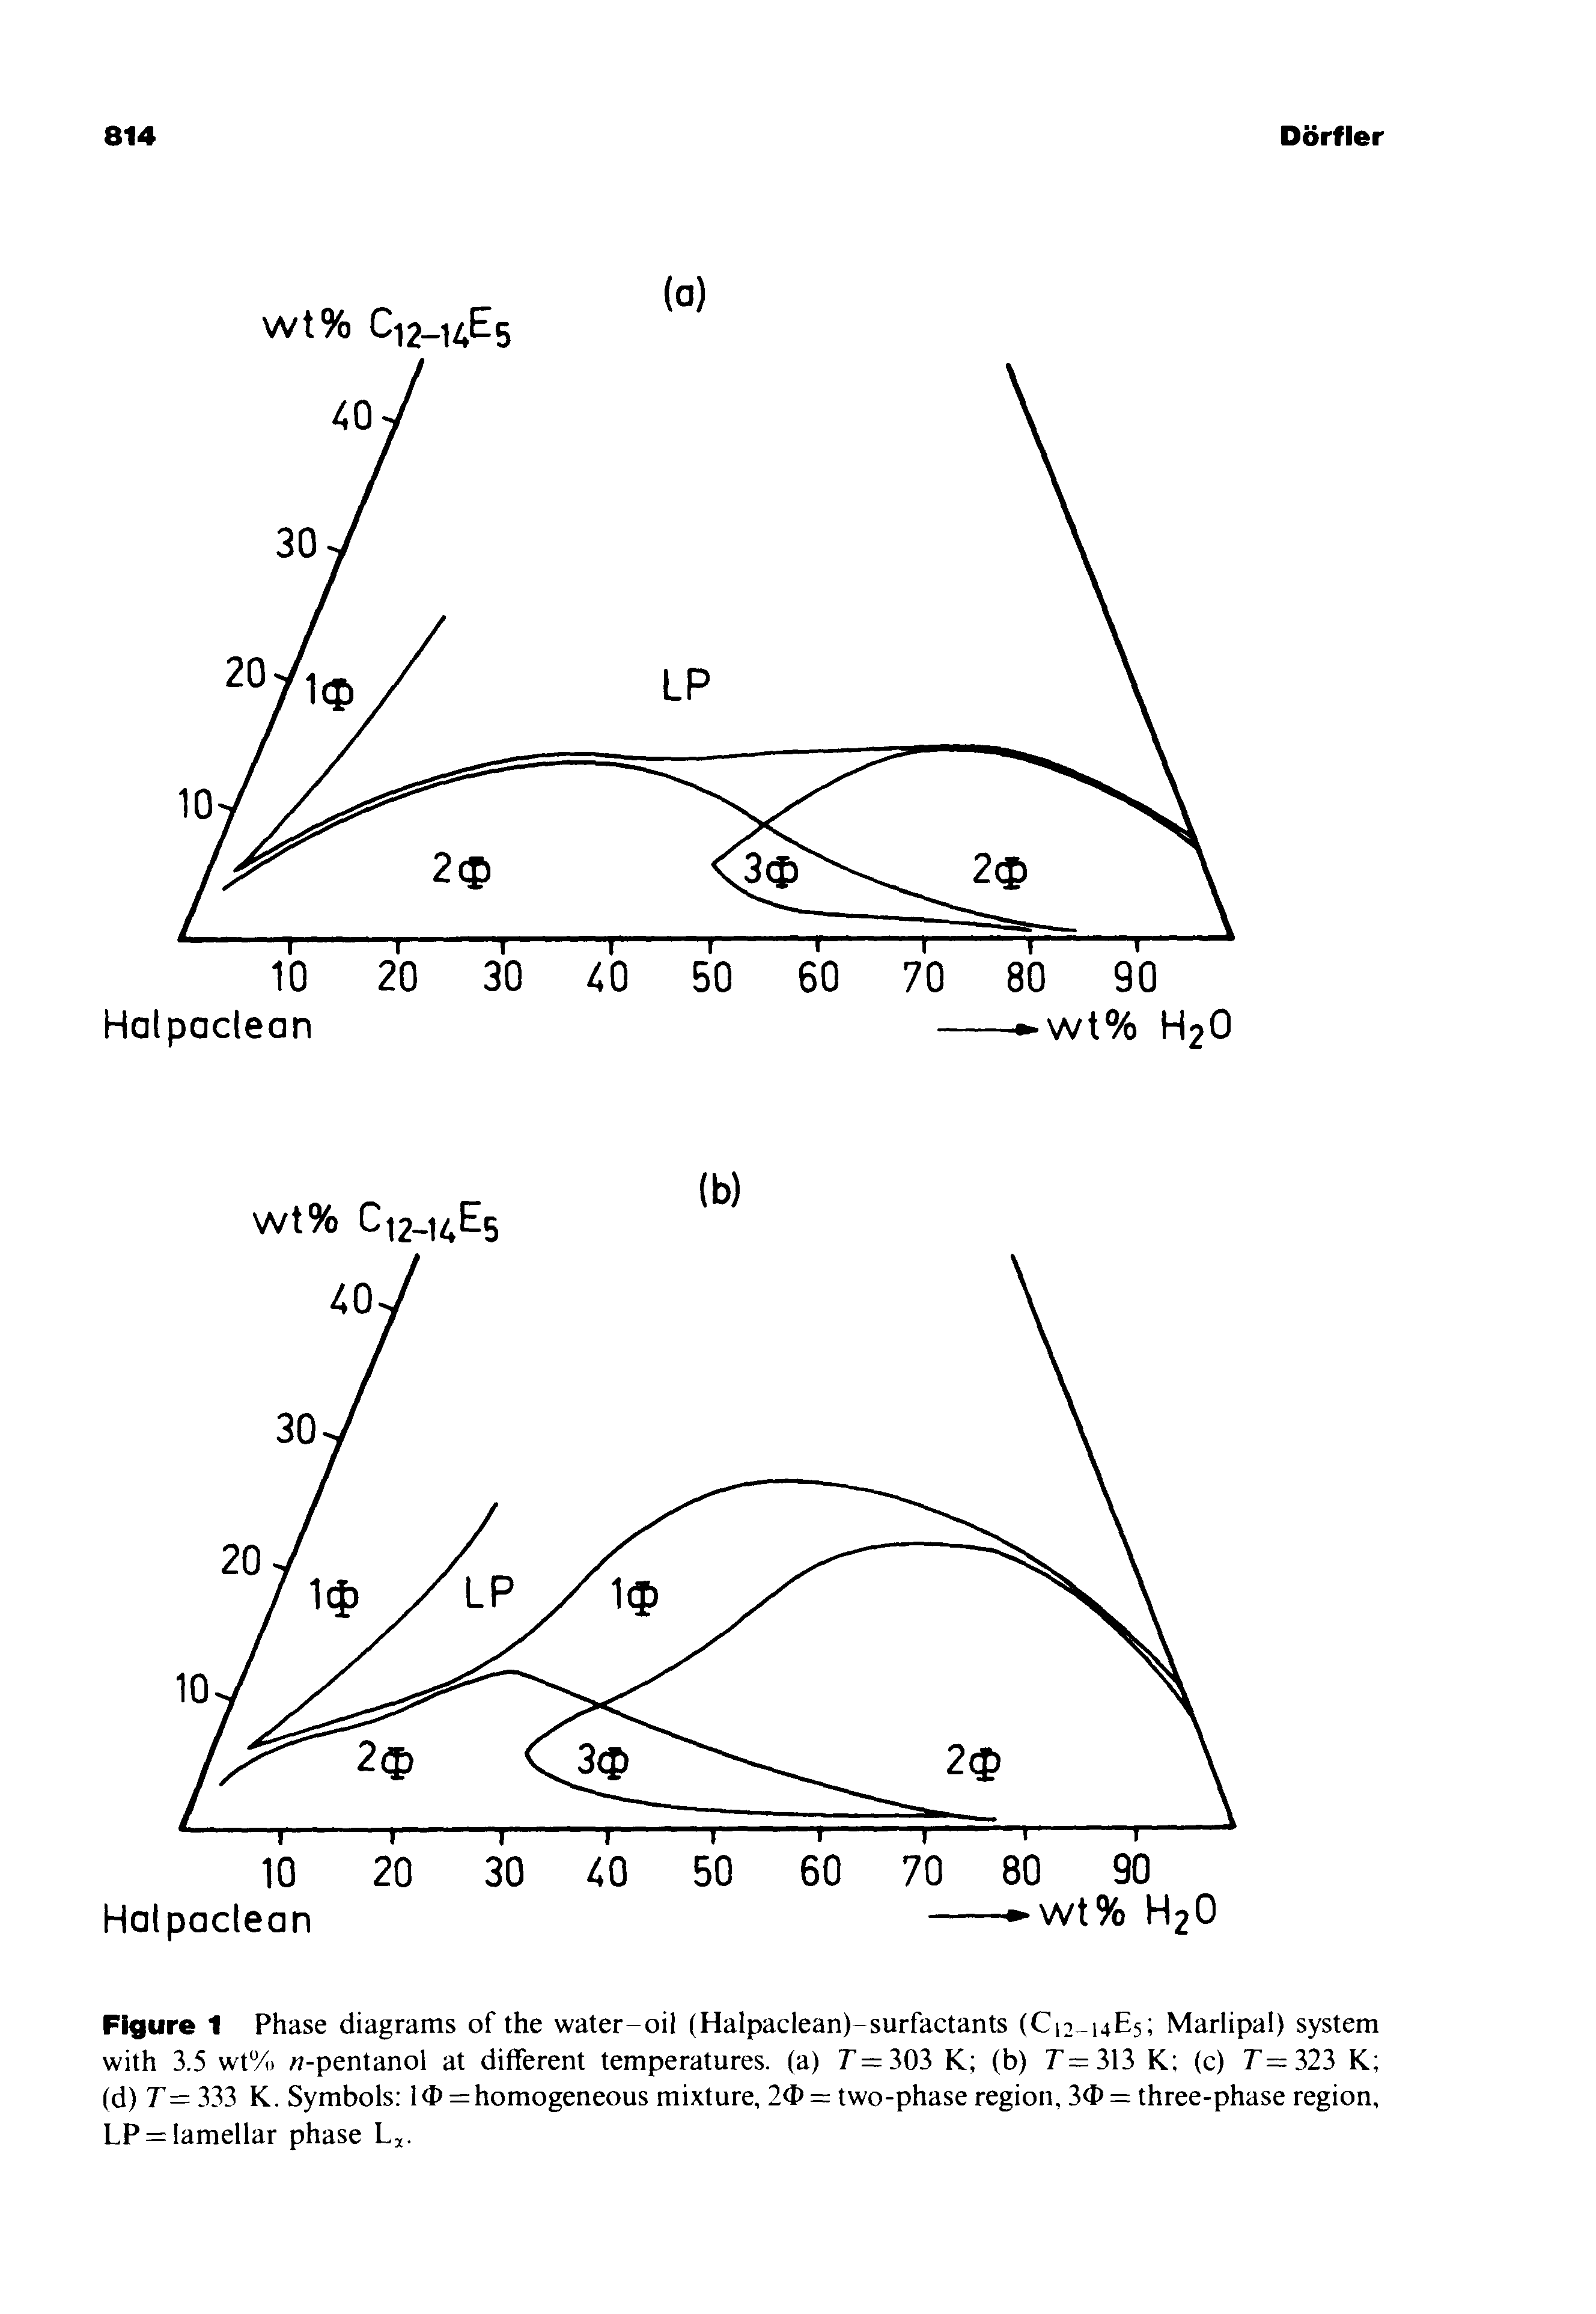 Figure 1 Phase diagrams of the water-oil (Halpaclean)-surfactants (C12-14E5 Marlipal) system with 3.5 wt% rt-pentanol at different temperatures, (a) r=303 K (b) r=313 K (c) T— >22i K (d) r= 333 K. Symbols < ) = homogeneous mixture, 2<b = two-phase region, 3<b = three-phase region, LP = lamellar phase...